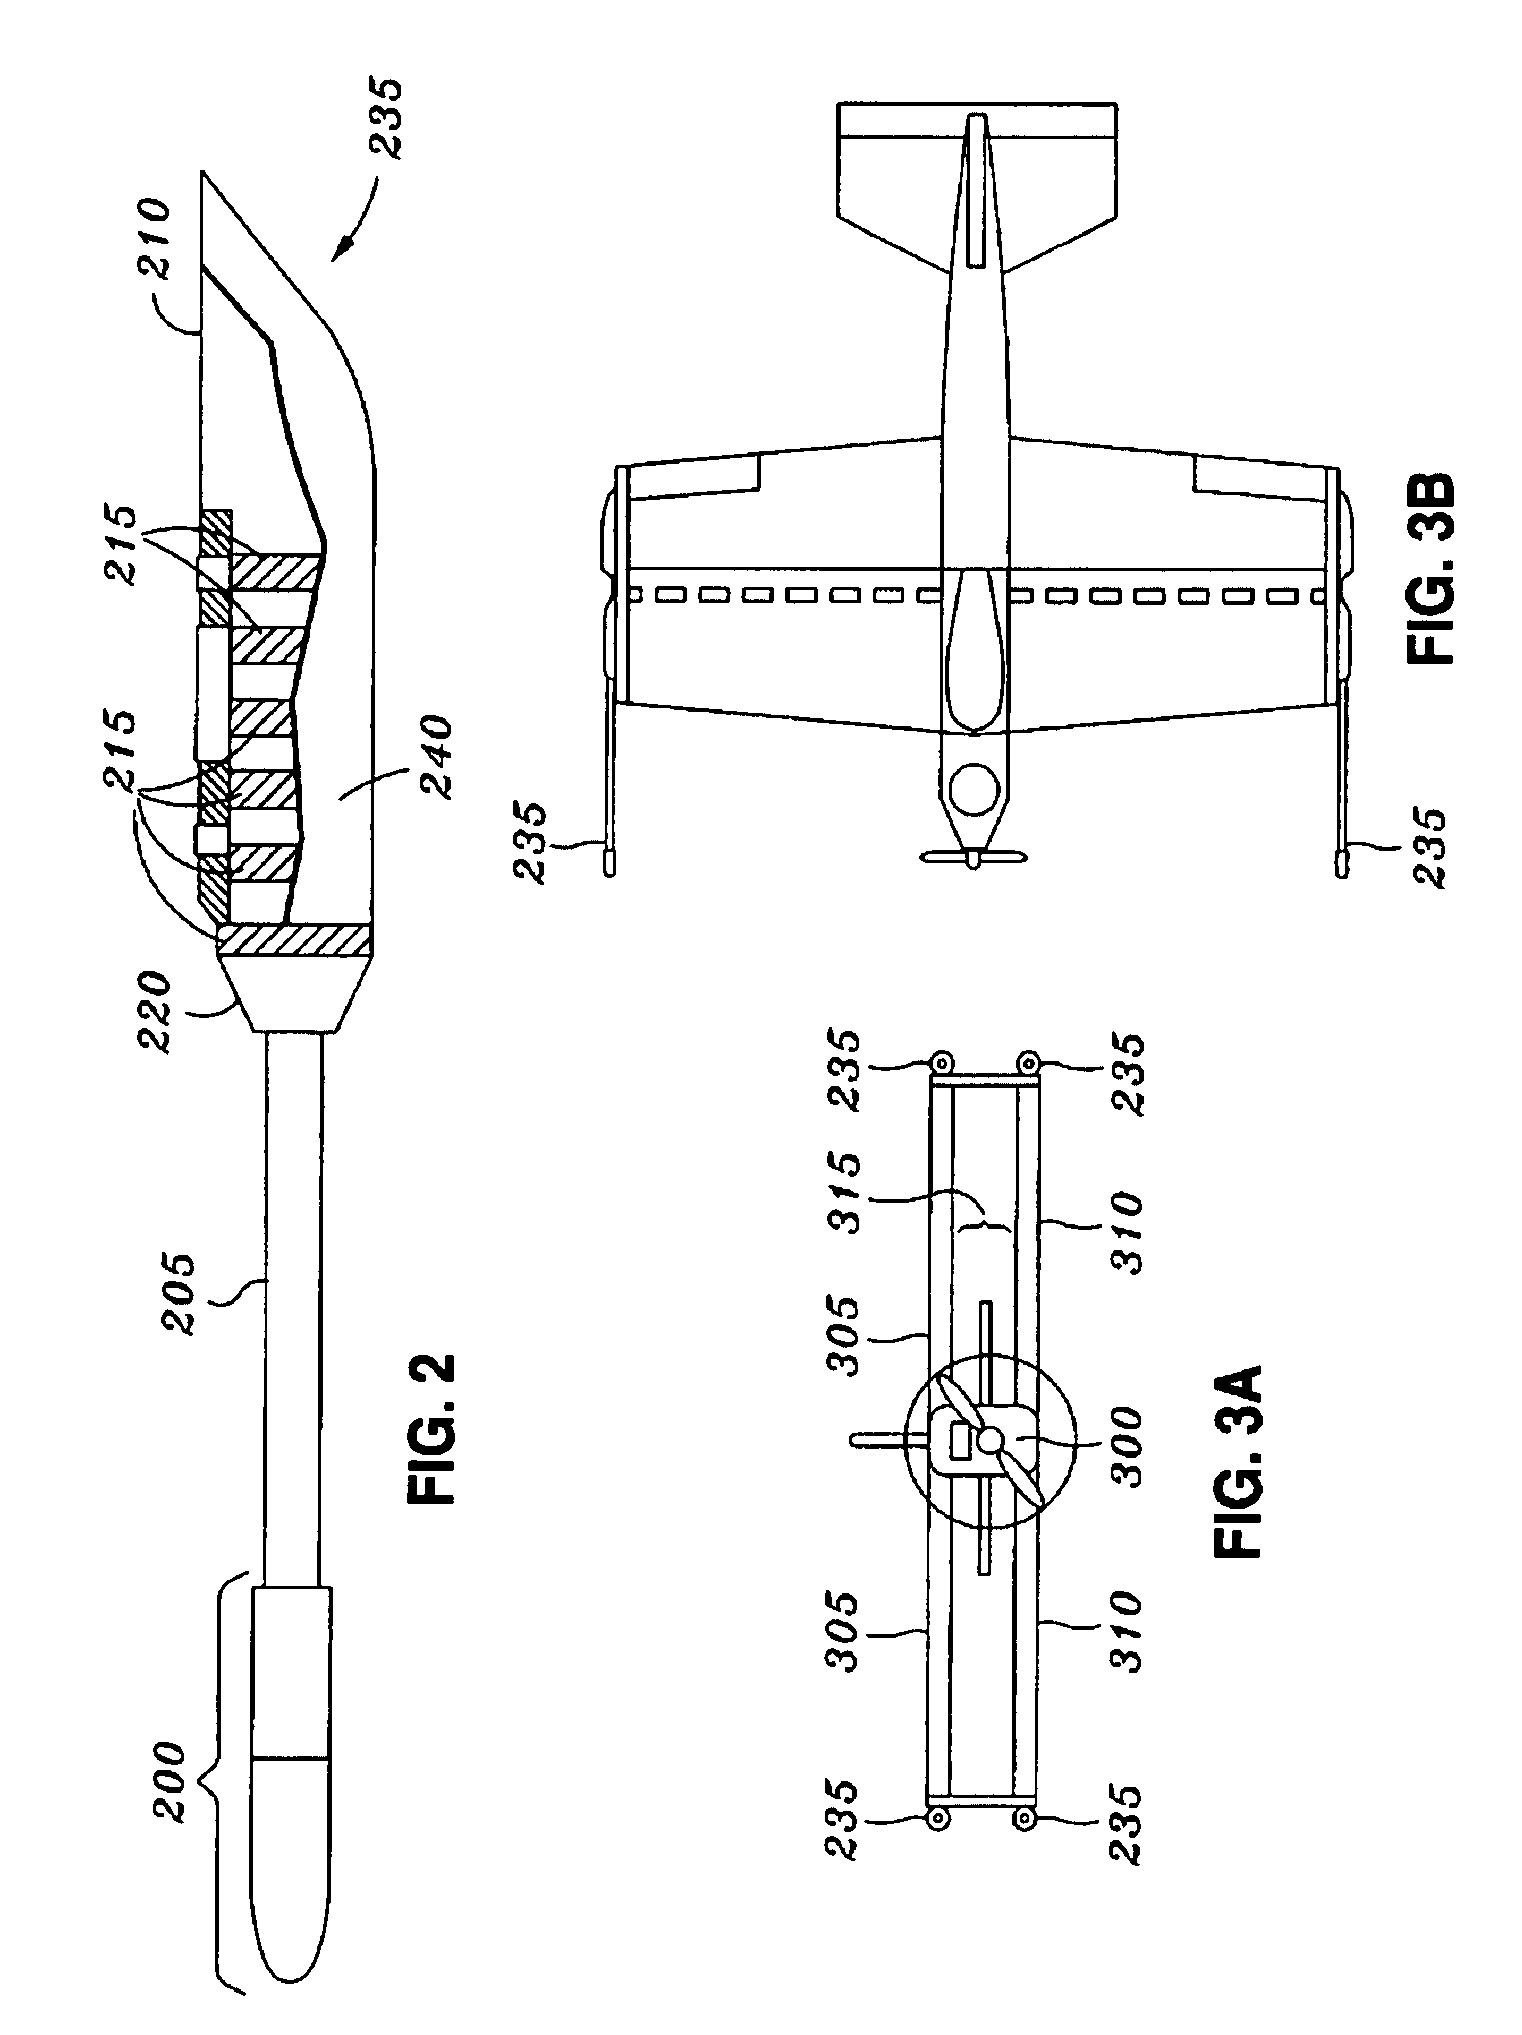 Acoustic airspace collision detection system